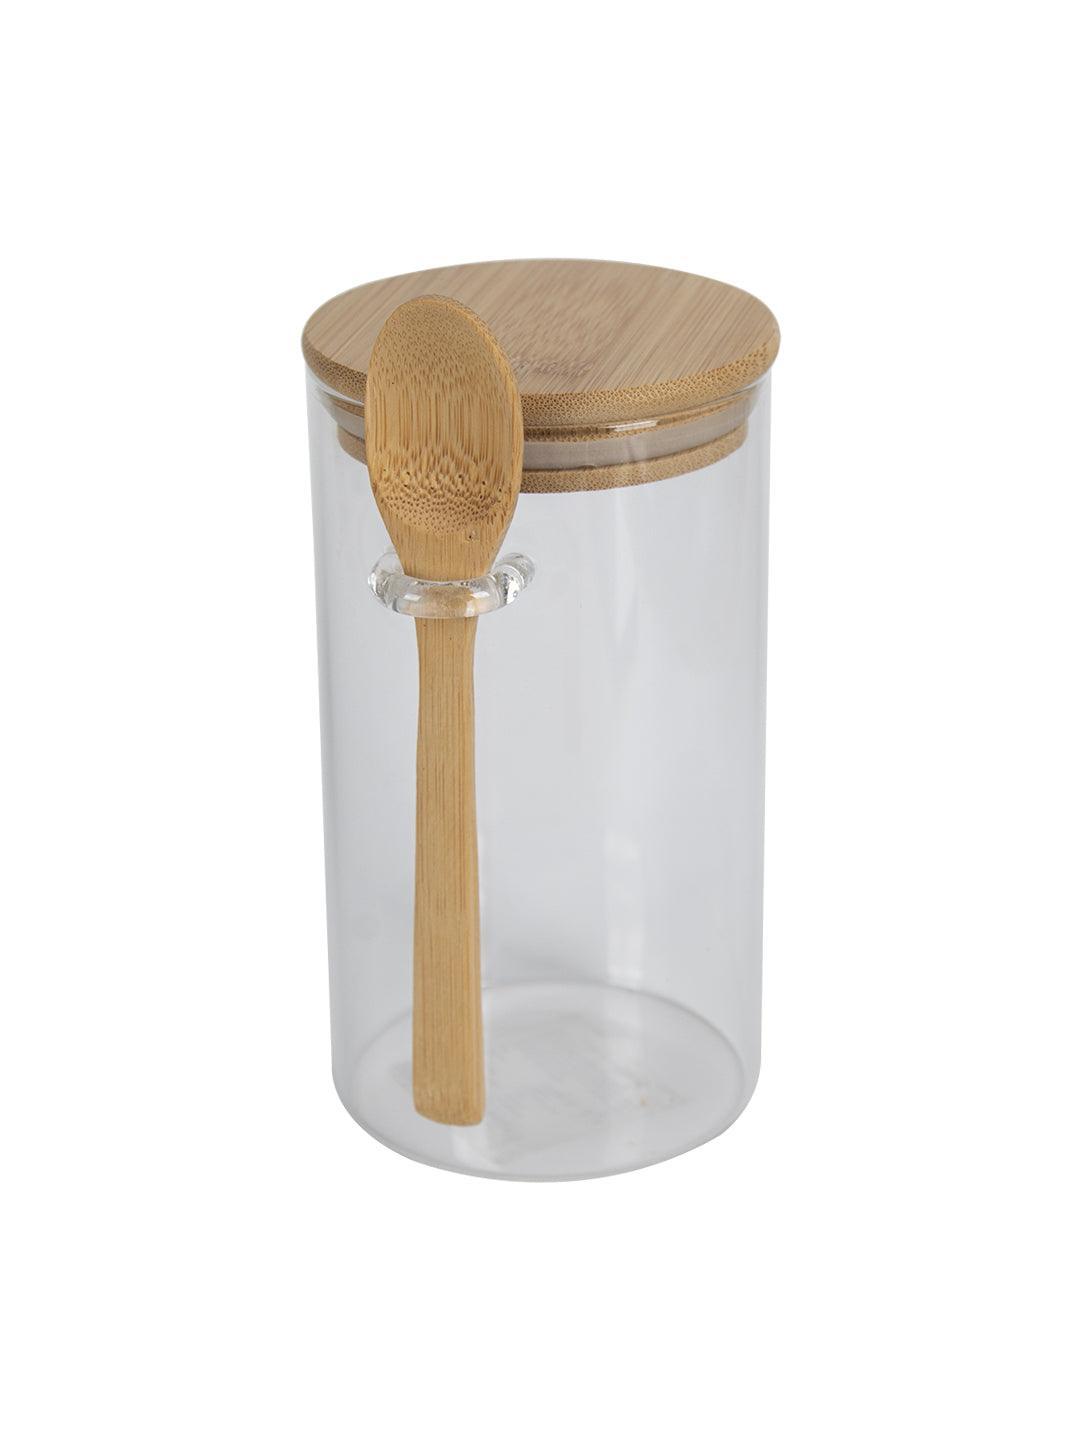 Market99 Glass Jar With Lid And Spoon - Food Storage, Kitchen